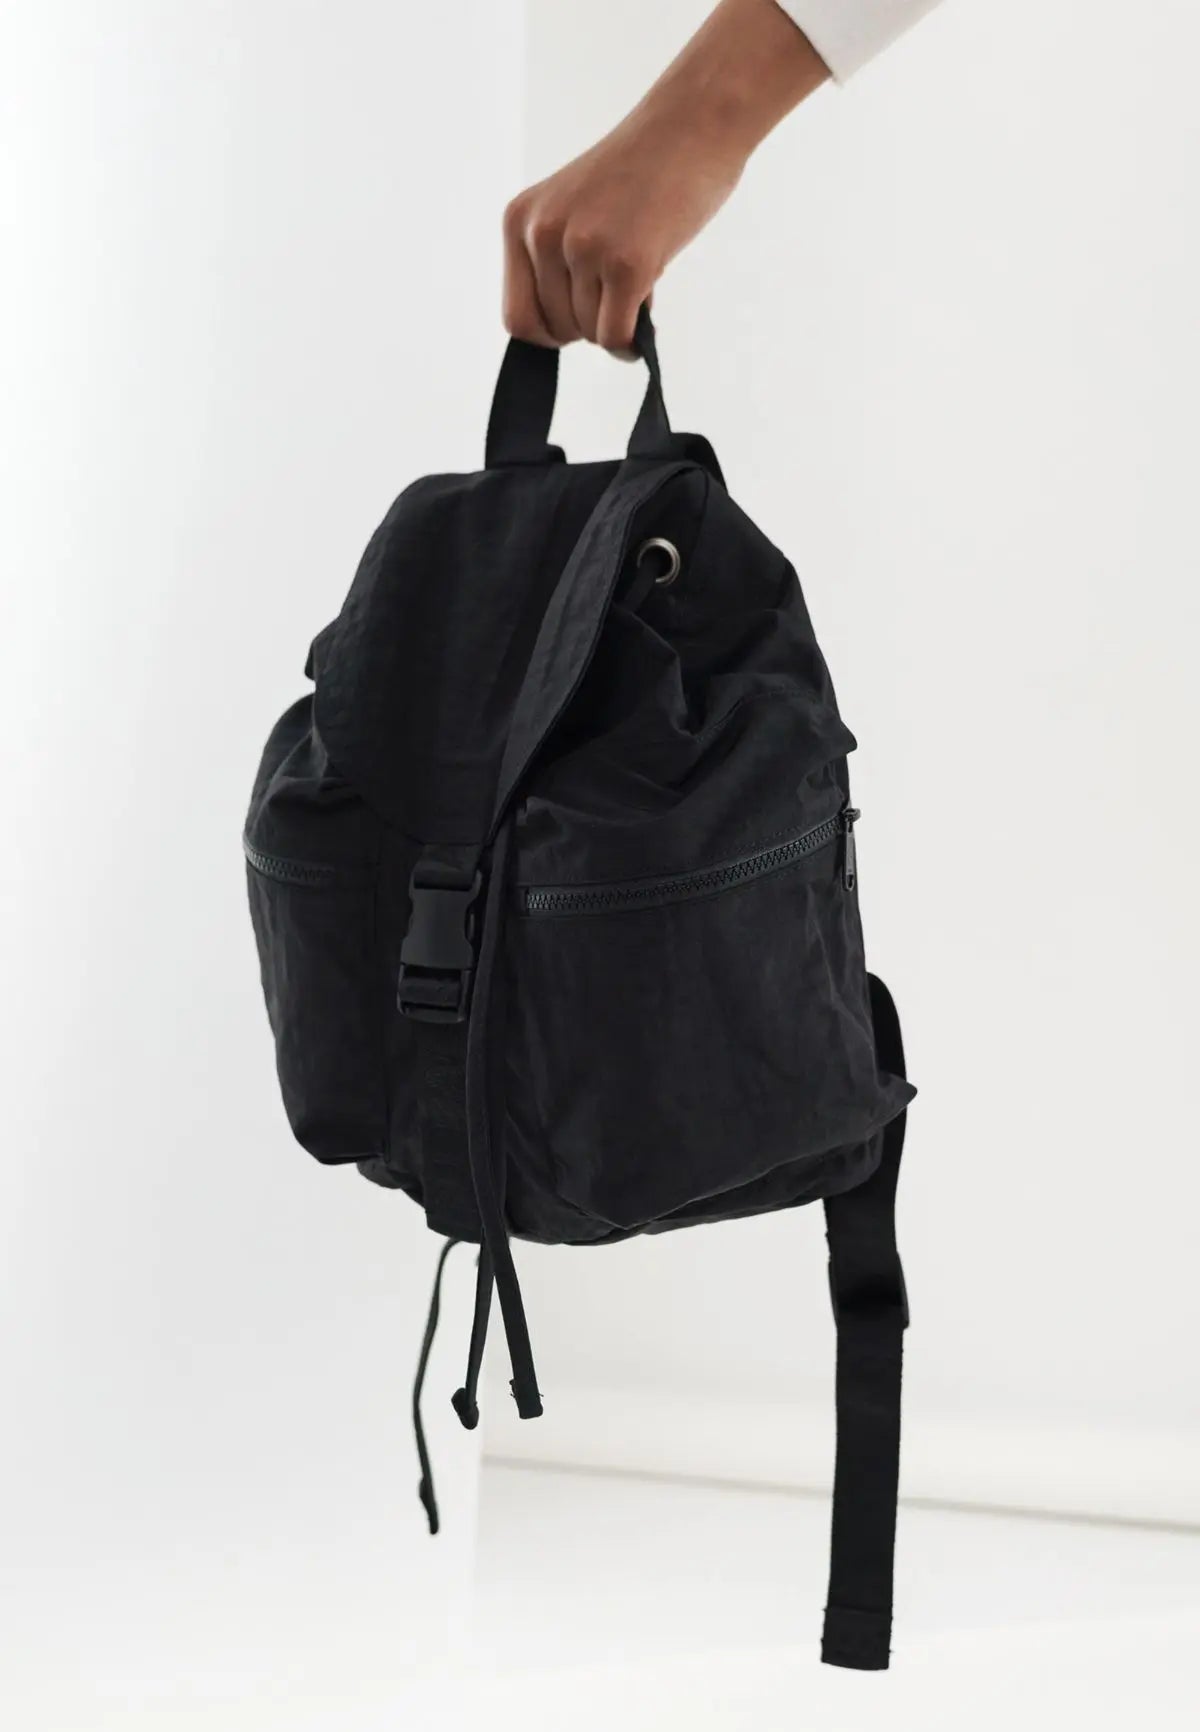 SMALL SPORT BACKPACK BLACK